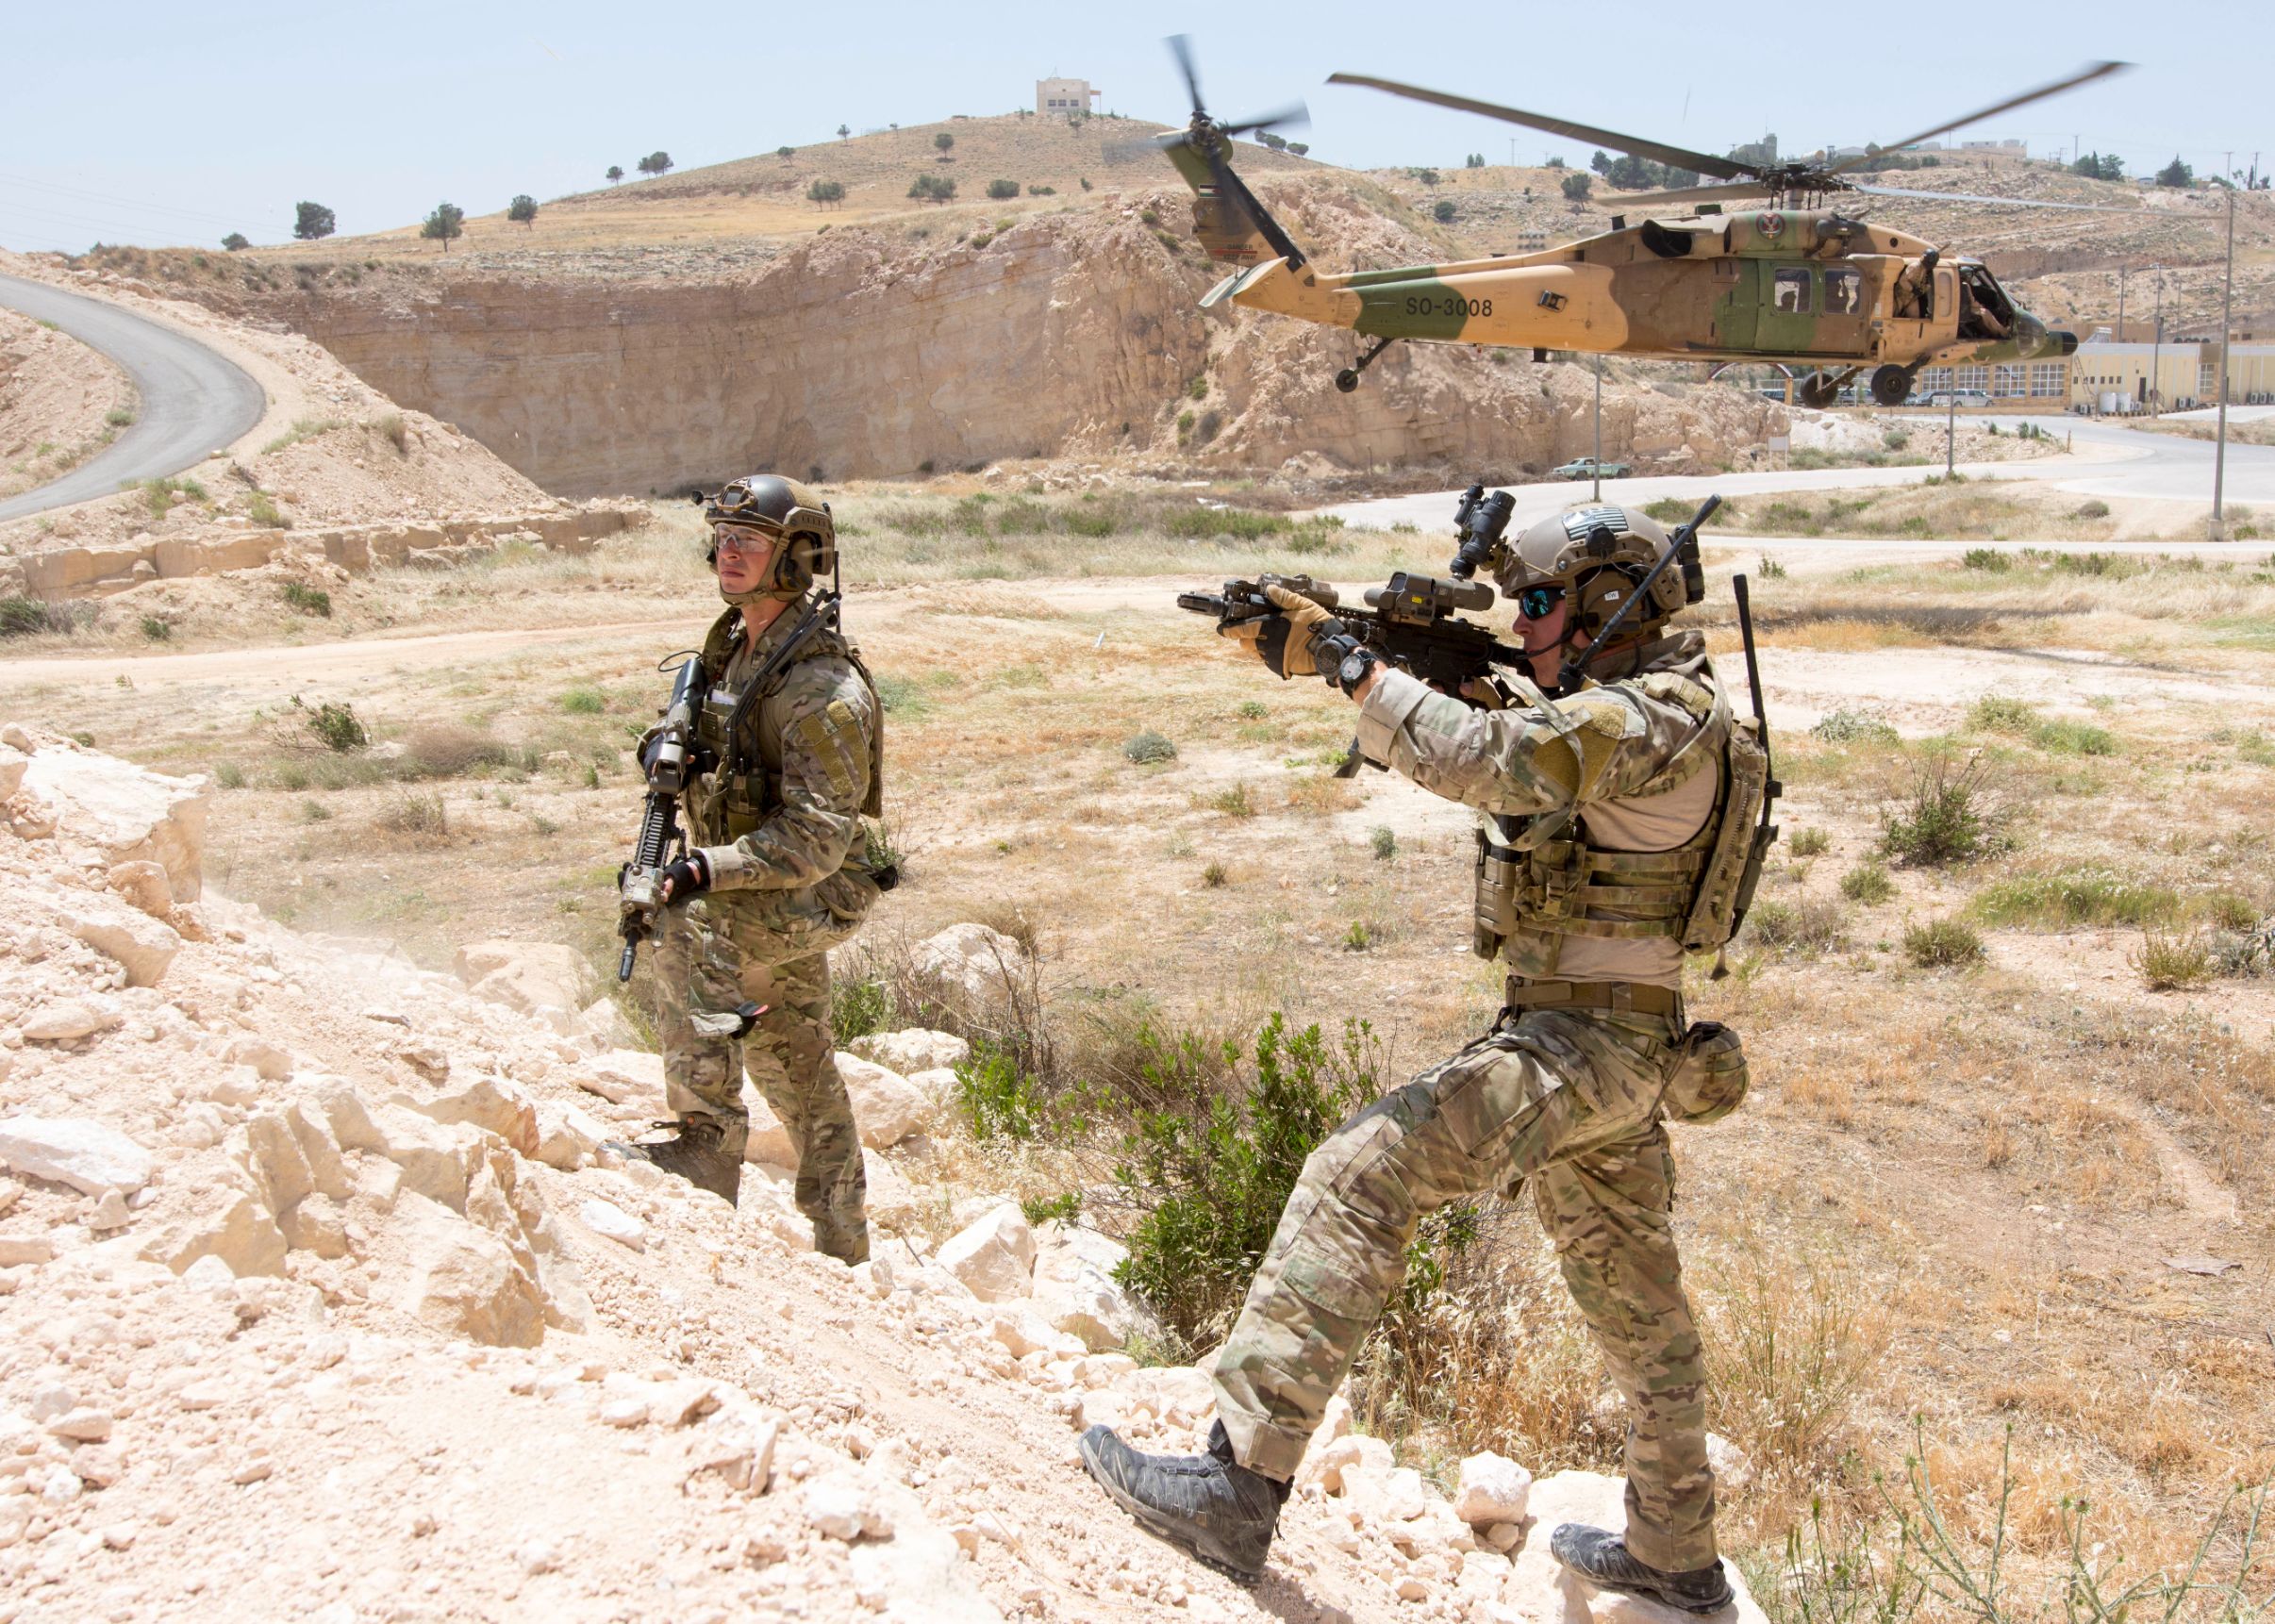 AMMAN, Jordan (May 11, 2017) Members of the Air Force Special Operations, assigned to the 23rd Special Tactics Squadron, provide security of a landing zone during a combat search and rescue exercise in support of Eager Lion 2017. Eager Lion is an annual U.S. Central Command exercise in Jordan designed to strengthen military-to-military relationships between the U.S.